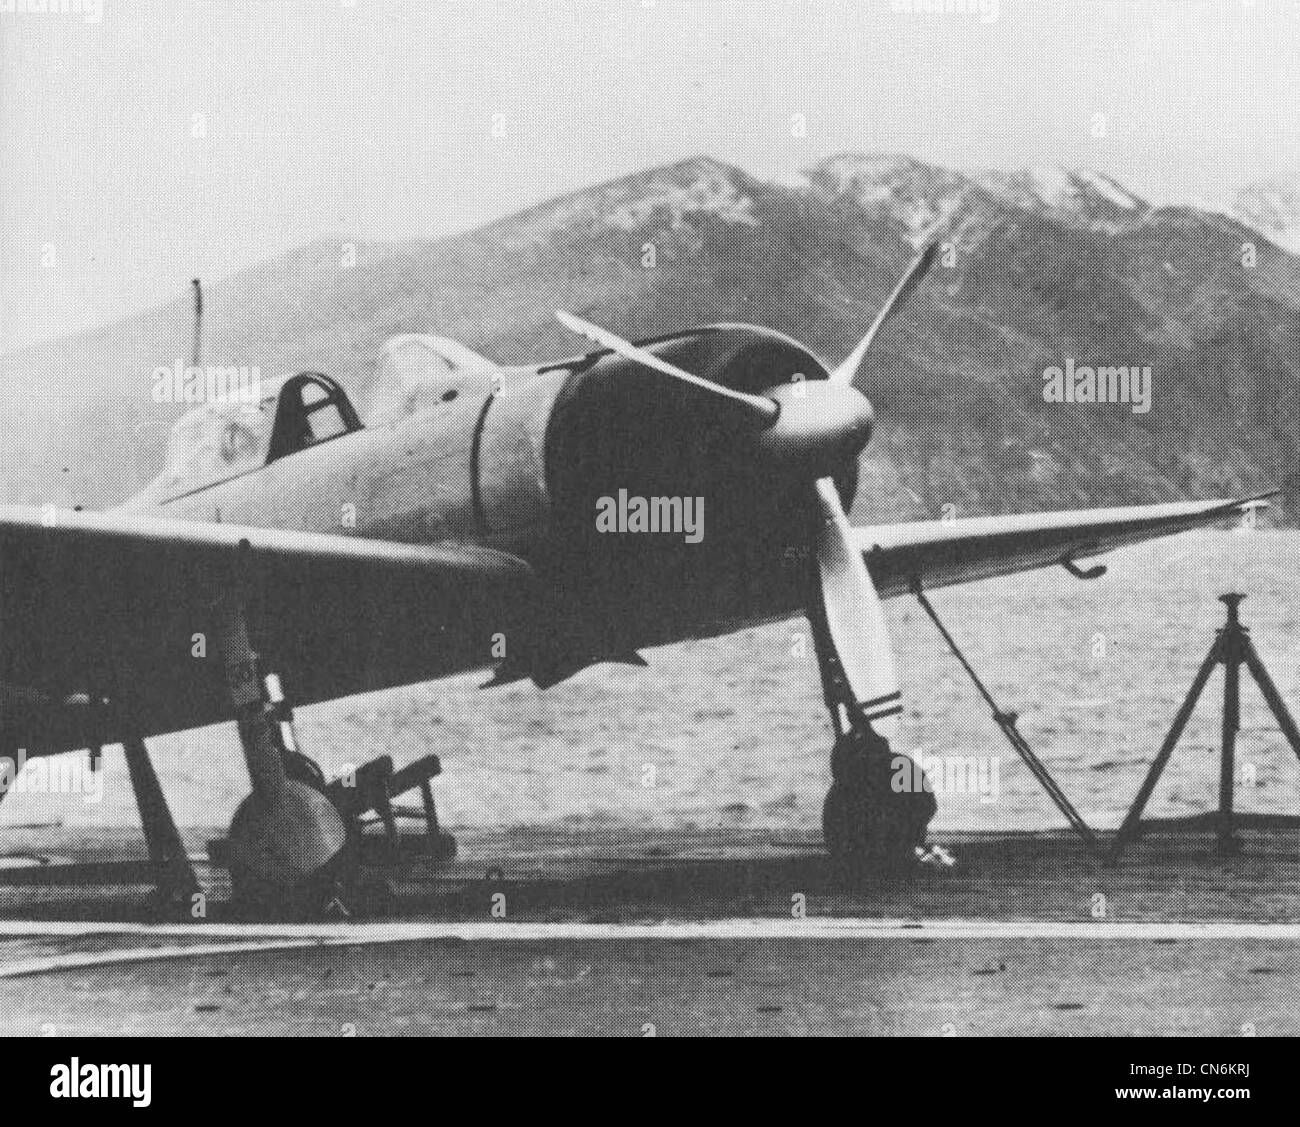 A Mitsubishi A6M Kansen AI-156 Zero fighter aboard the Imperial Japanese Navy aircraft carrier Akagi at Hitokappu Bay, Kuriles in November 1941 prior to departing for the attack on Pearl Harbor. Note the number 56 on the undercarriage fairing and lower engine cowling. The grid of black dots on the deck are, tie down points for securing the aircraft. Stock Photo